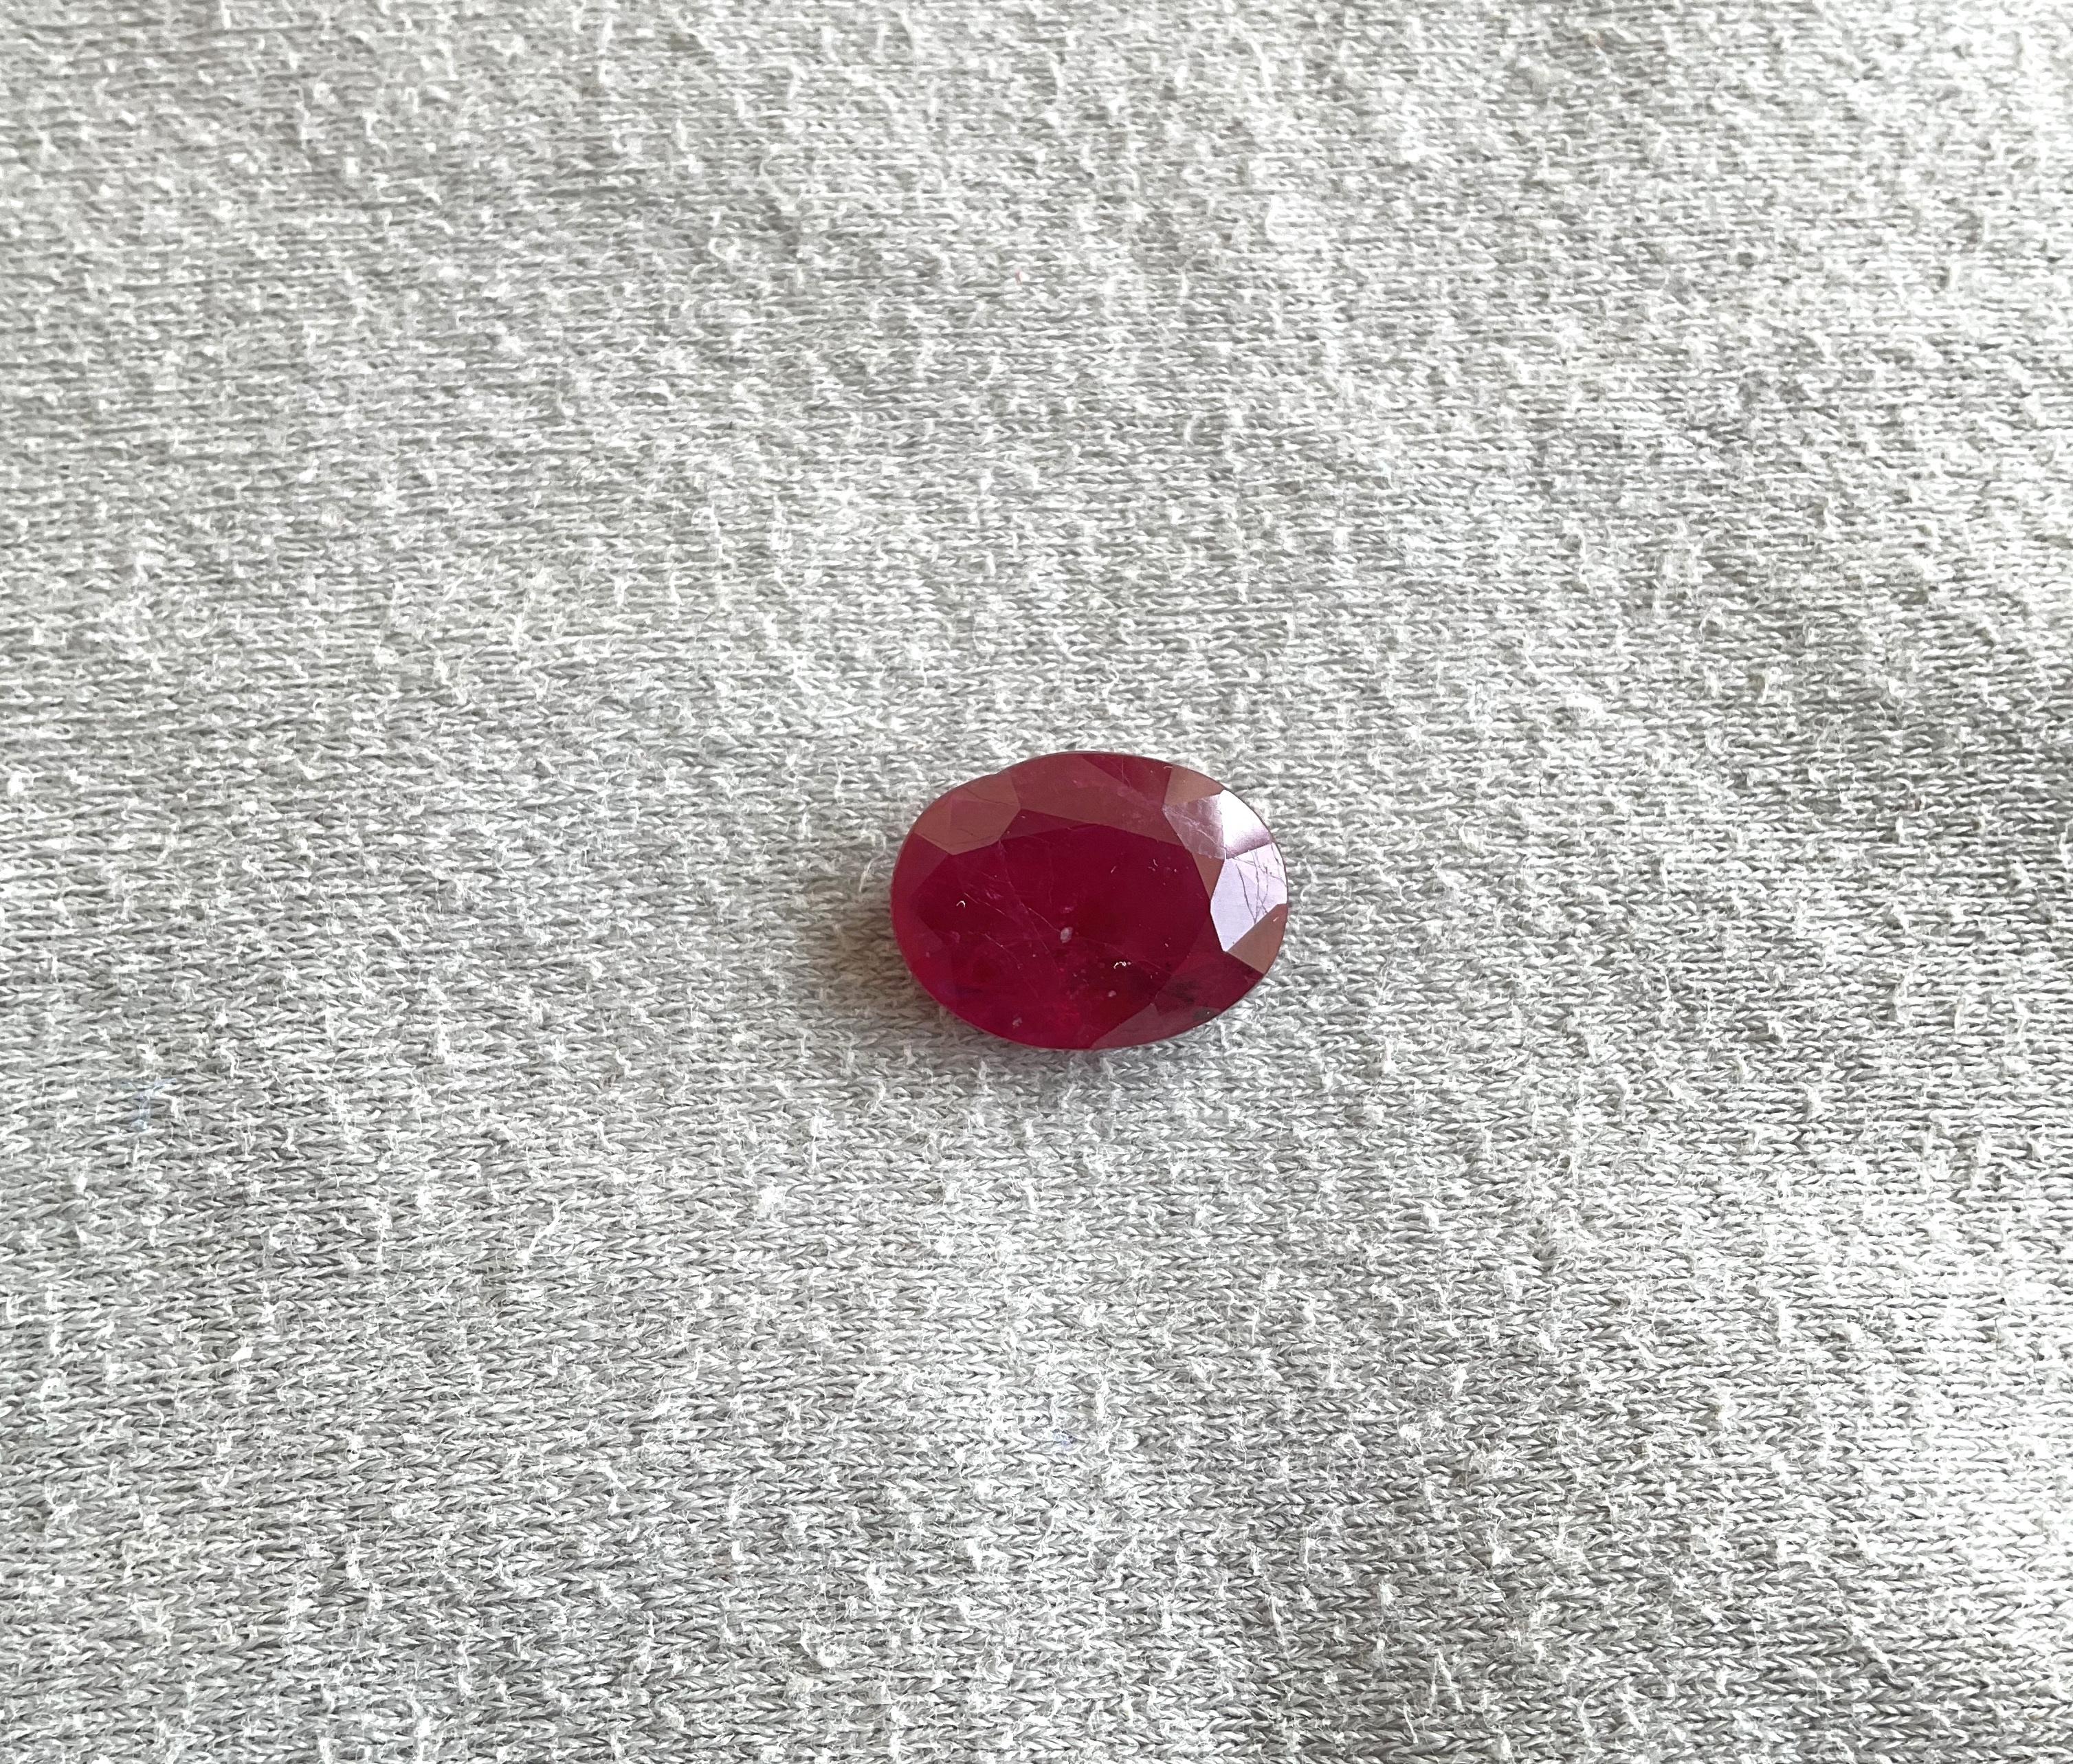 8.71 Carats Burmese No-Heat Ruby Natural Oval Cut Stone For Top Fine Jewelry Gem

Weight: 8.71 Carats
Size: 14.5x11 MM
Pieces: 1
Shape: Oval Cut